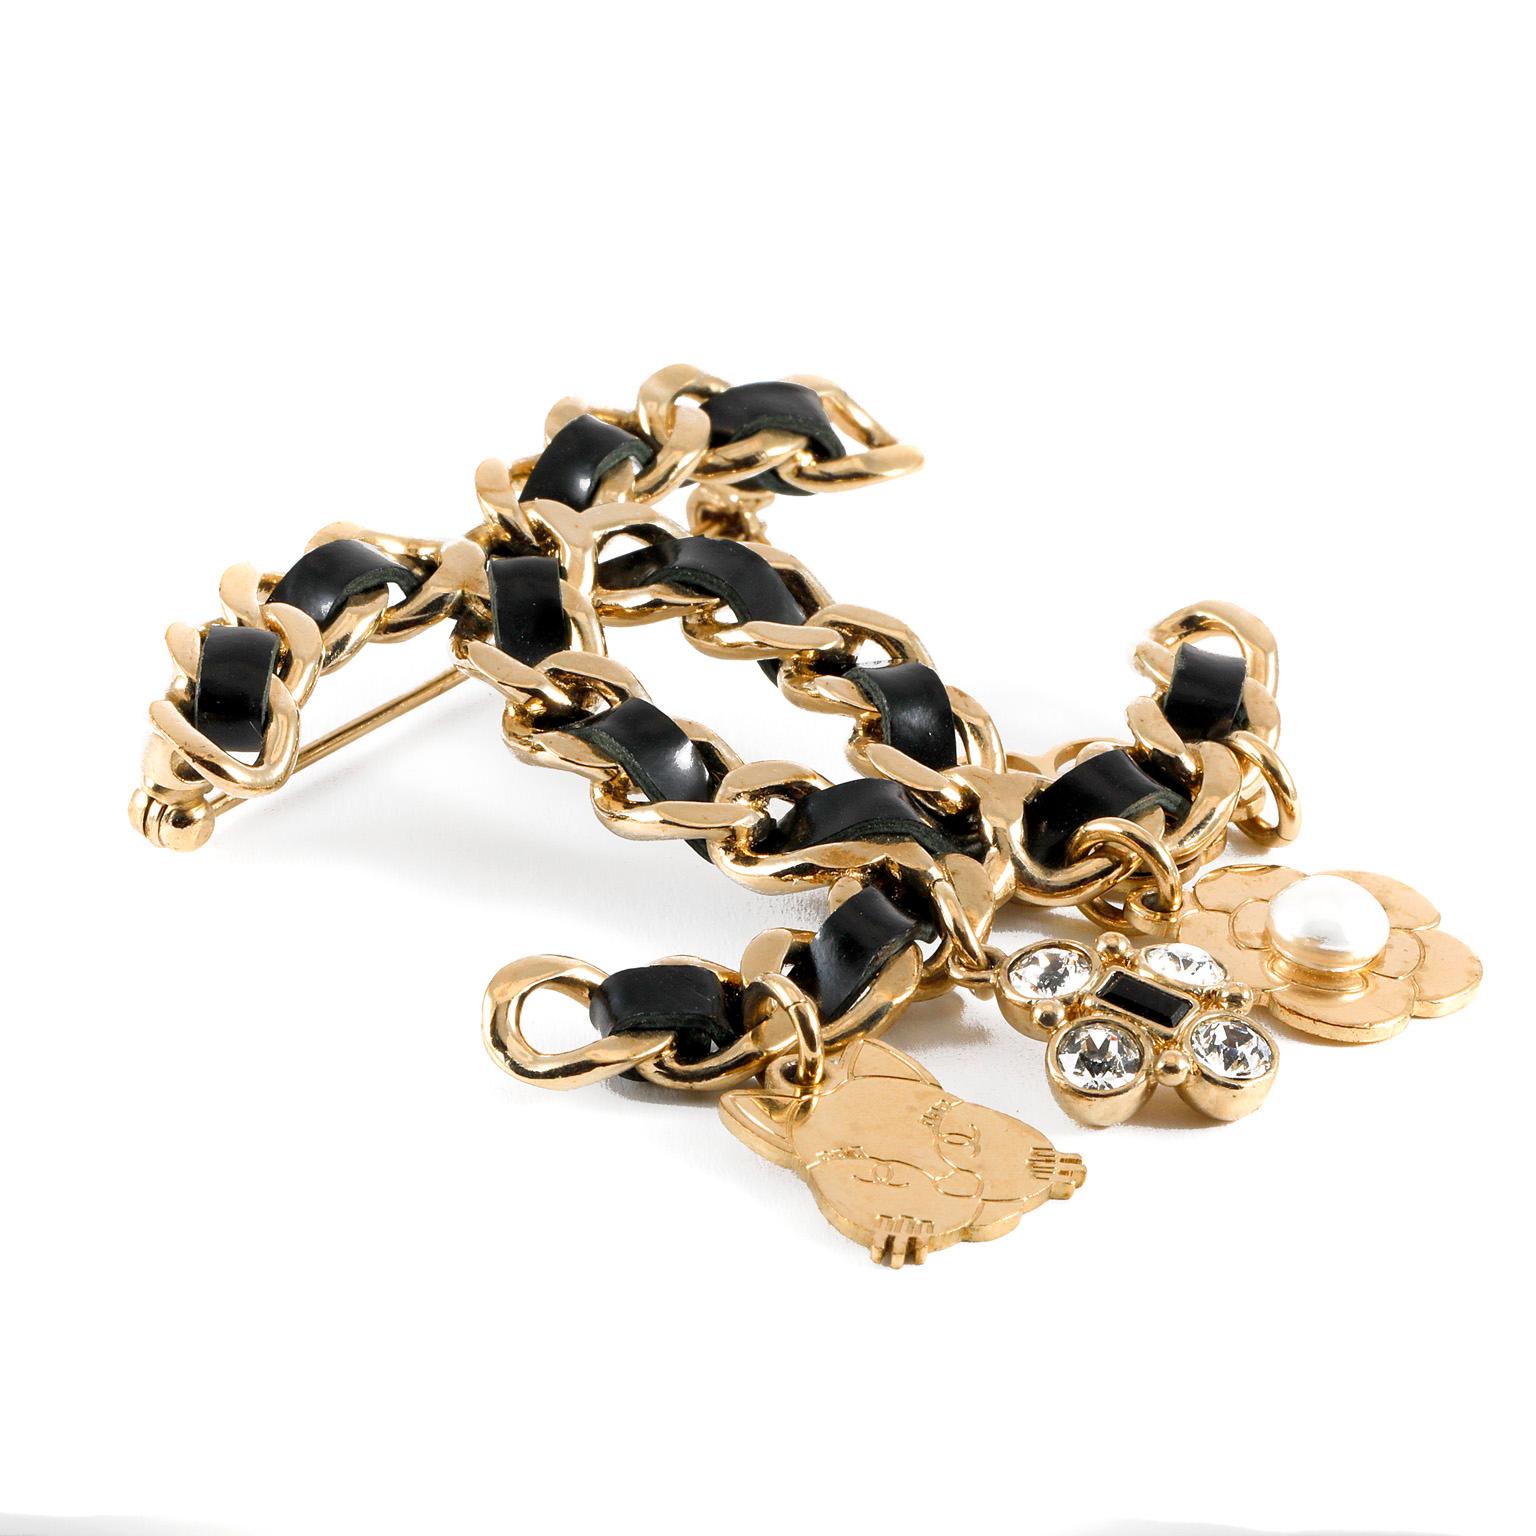 This authentic Chanel Black Leather CC Charm Brooch is in pristine condition.  Interwoven black leather and gold chain large interlocking CC pin with four iconic Chanel charms.  Cats, clovers and camellias adorn this stunning brooch.  Pouch or box